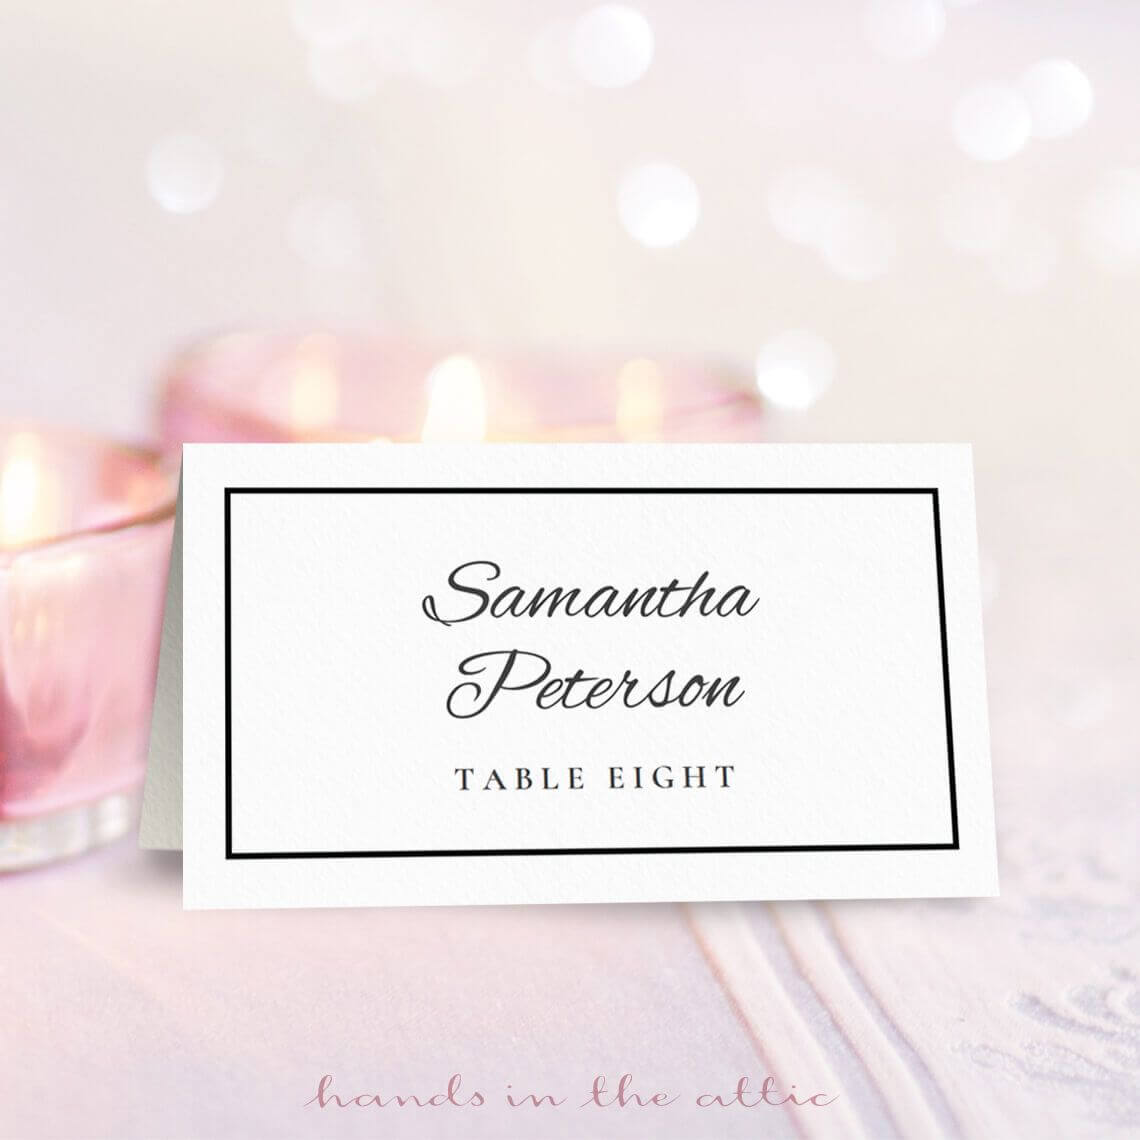 001 Free Place Card Template Excellent Ideas Name Microsoft Intended For Word Anniversary Card Template